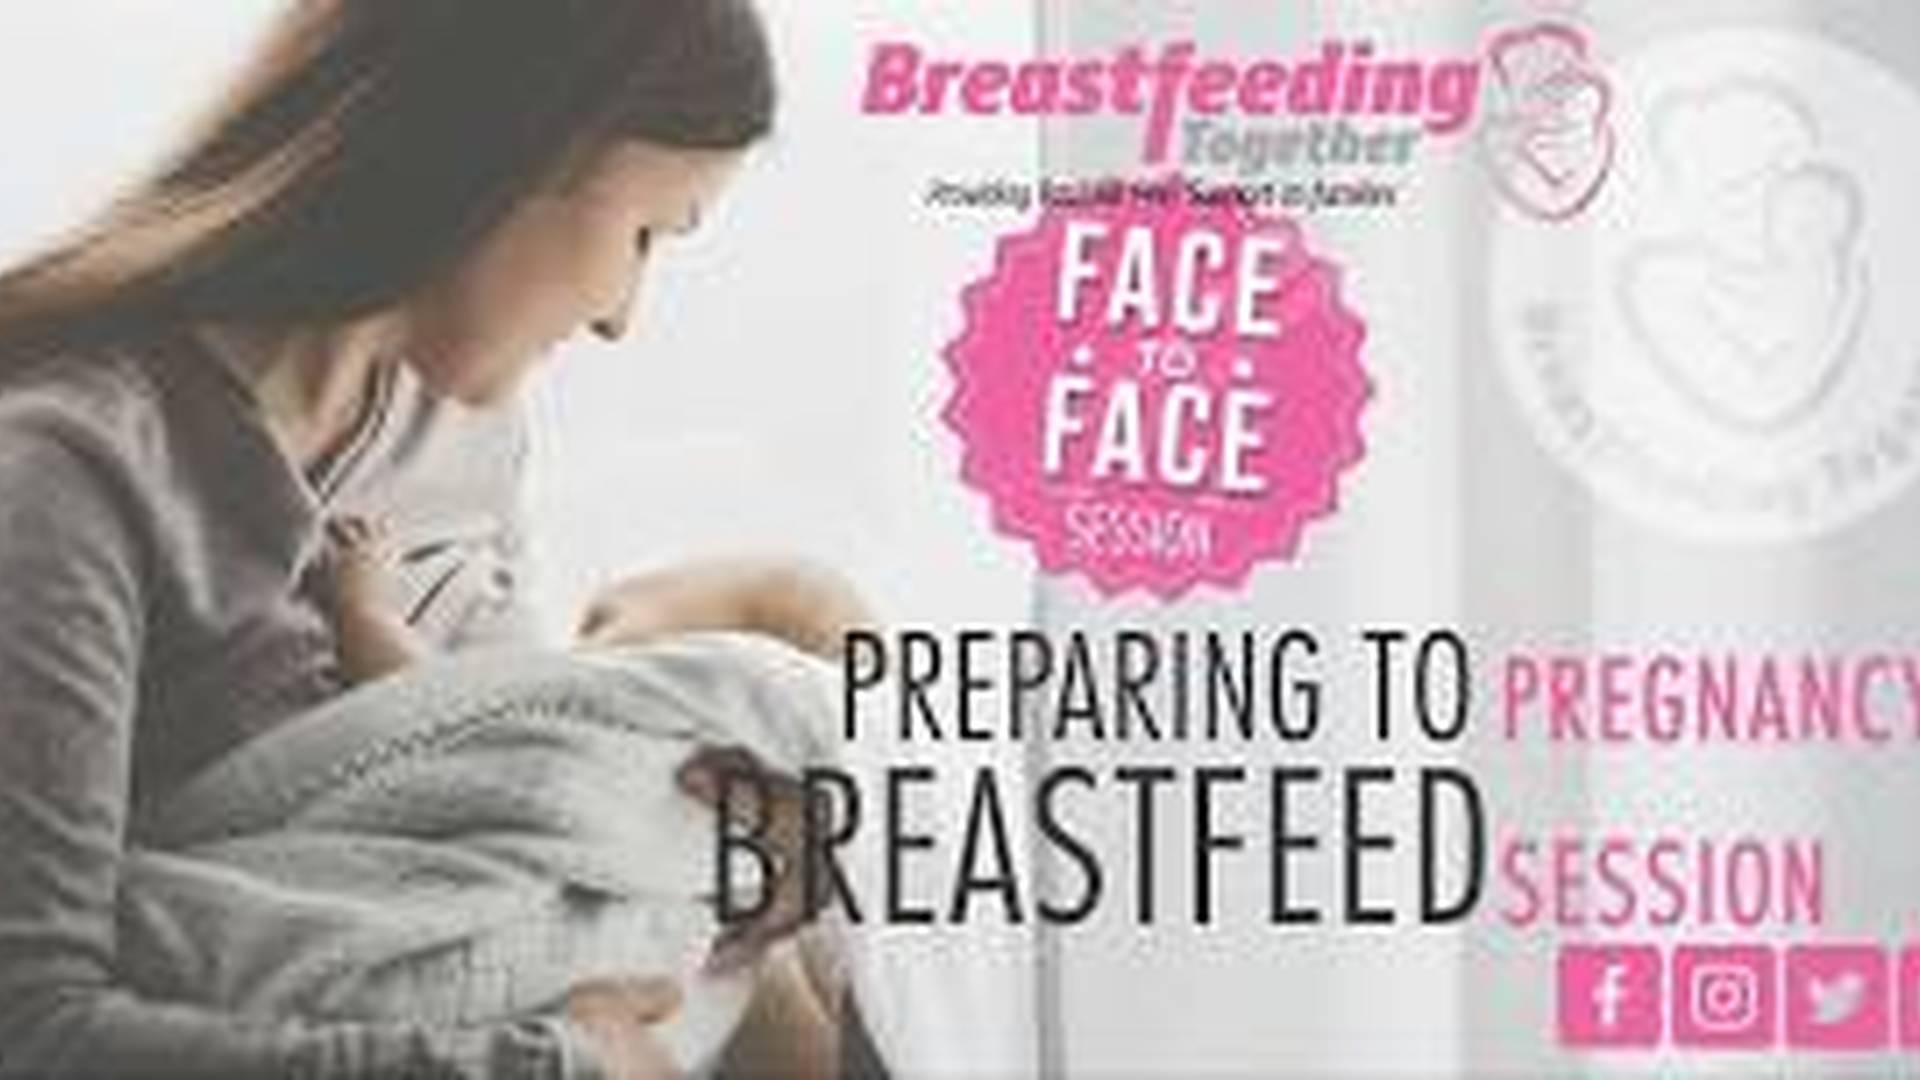 Preparing To Breastfeed - Face to Face Session photo